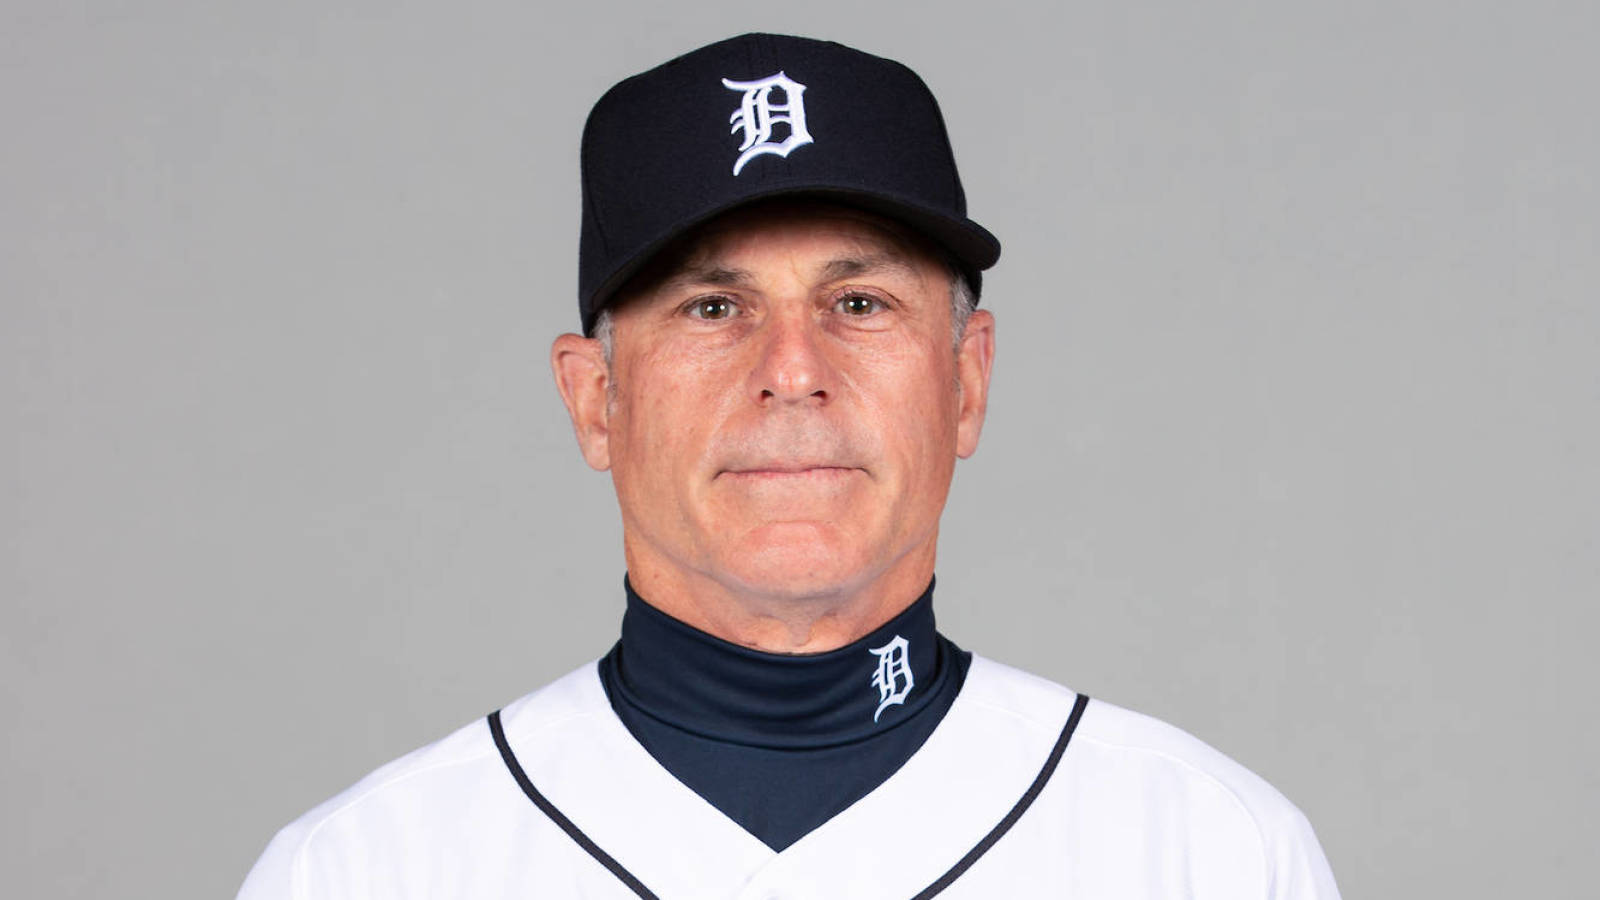 Chip Hale leaves Detroit Tigers to coach Arizona Wildcats